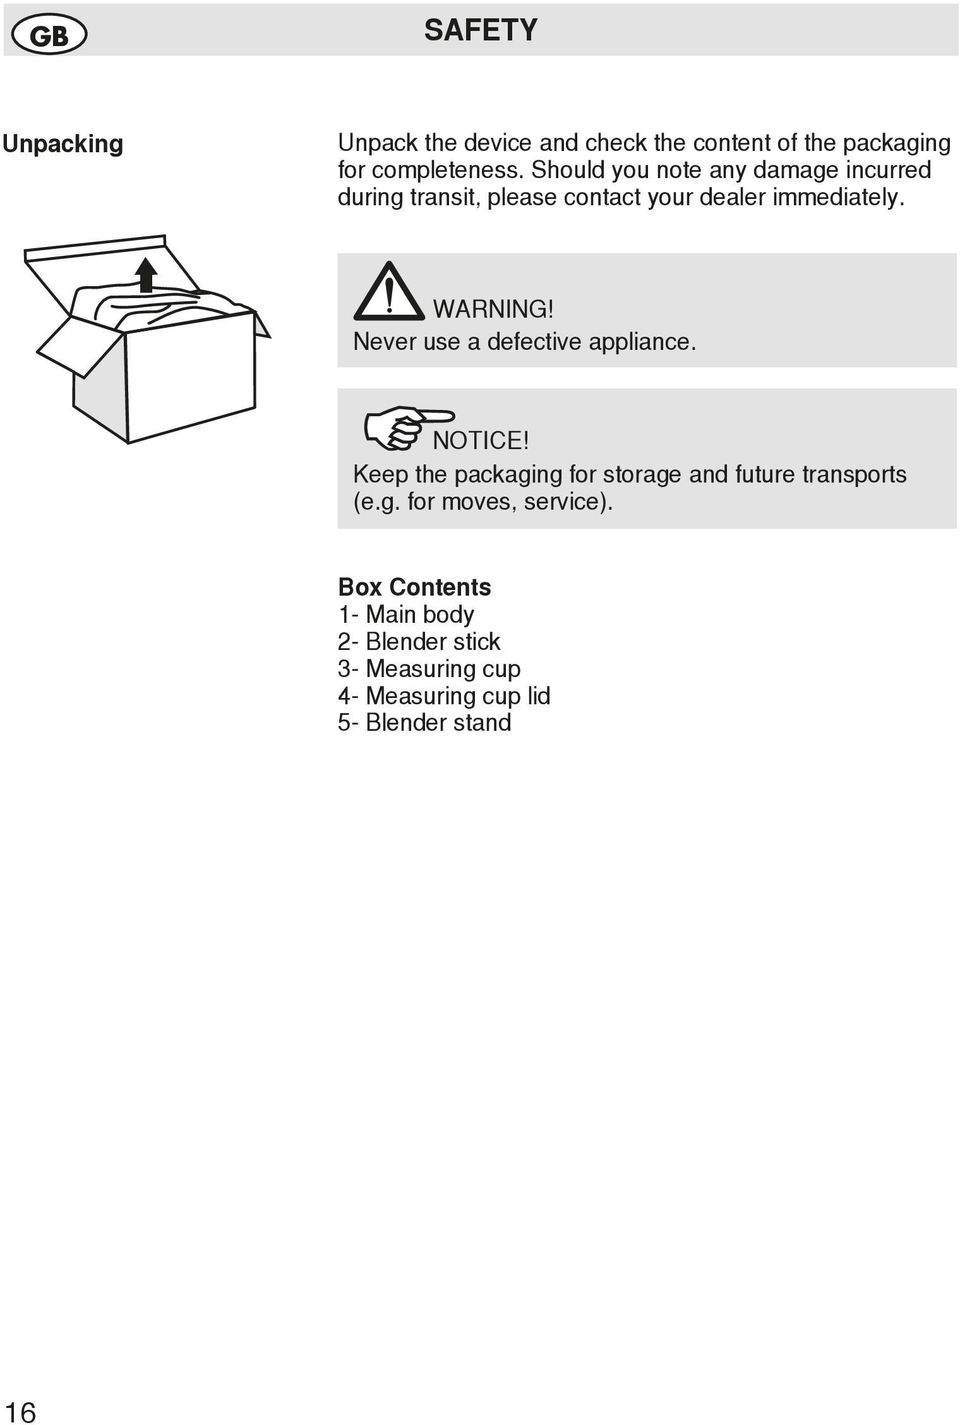 Never use a defective appliance. NOTICE! Keep the packaging for storage and future transports (e.g. for moves, service).